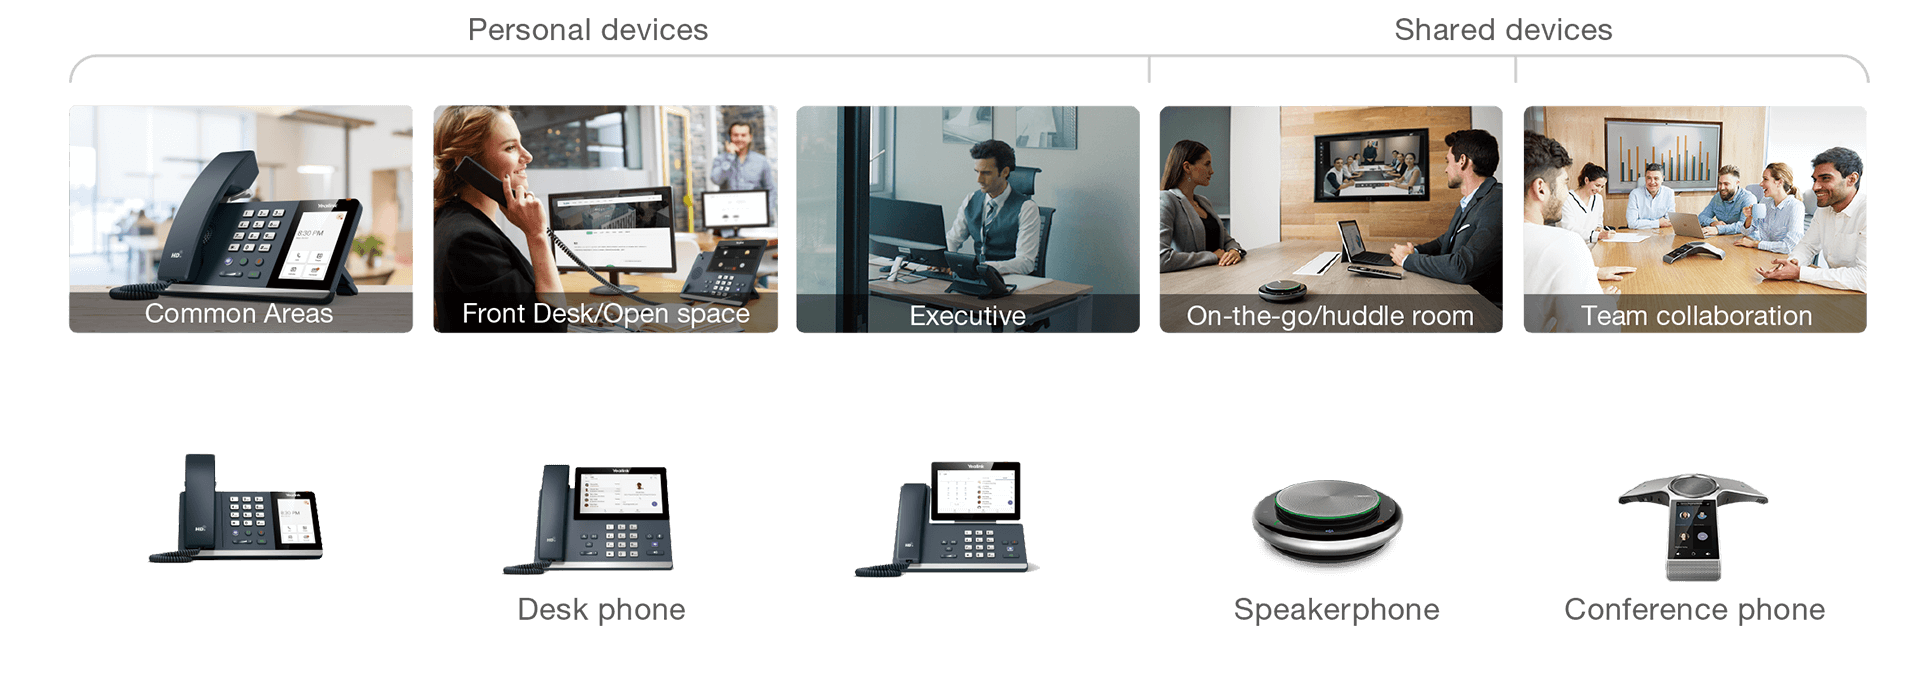 microsoft teams phone system,phone videos,voice over ip phone,office phone systems